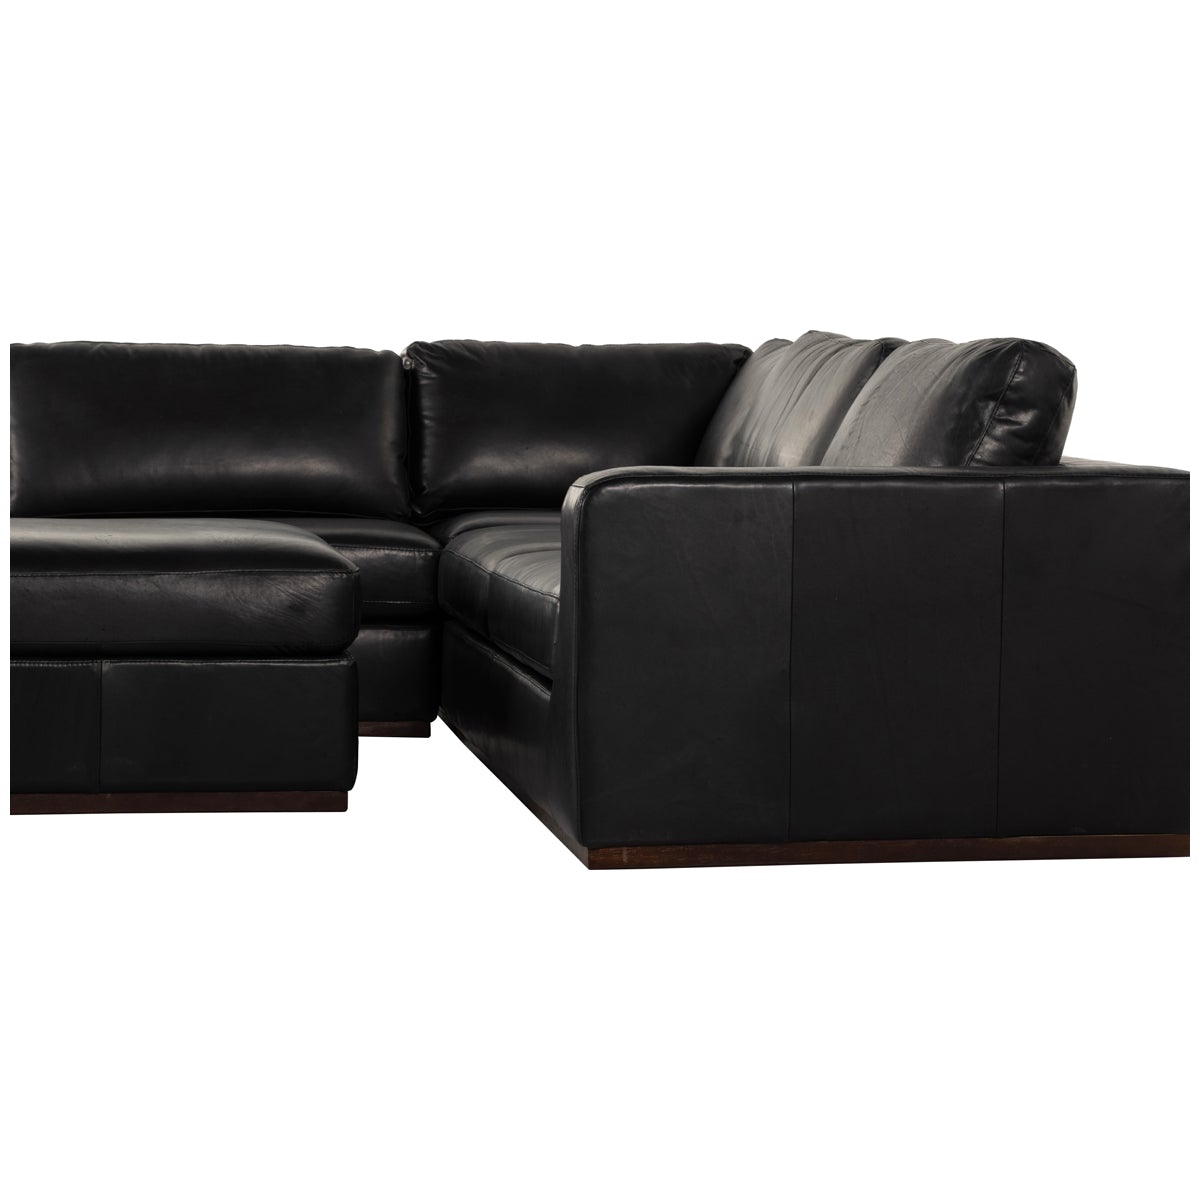 Four Hands Centrale Colt 3-Piece Heirloom Black Sectional with Ottoman